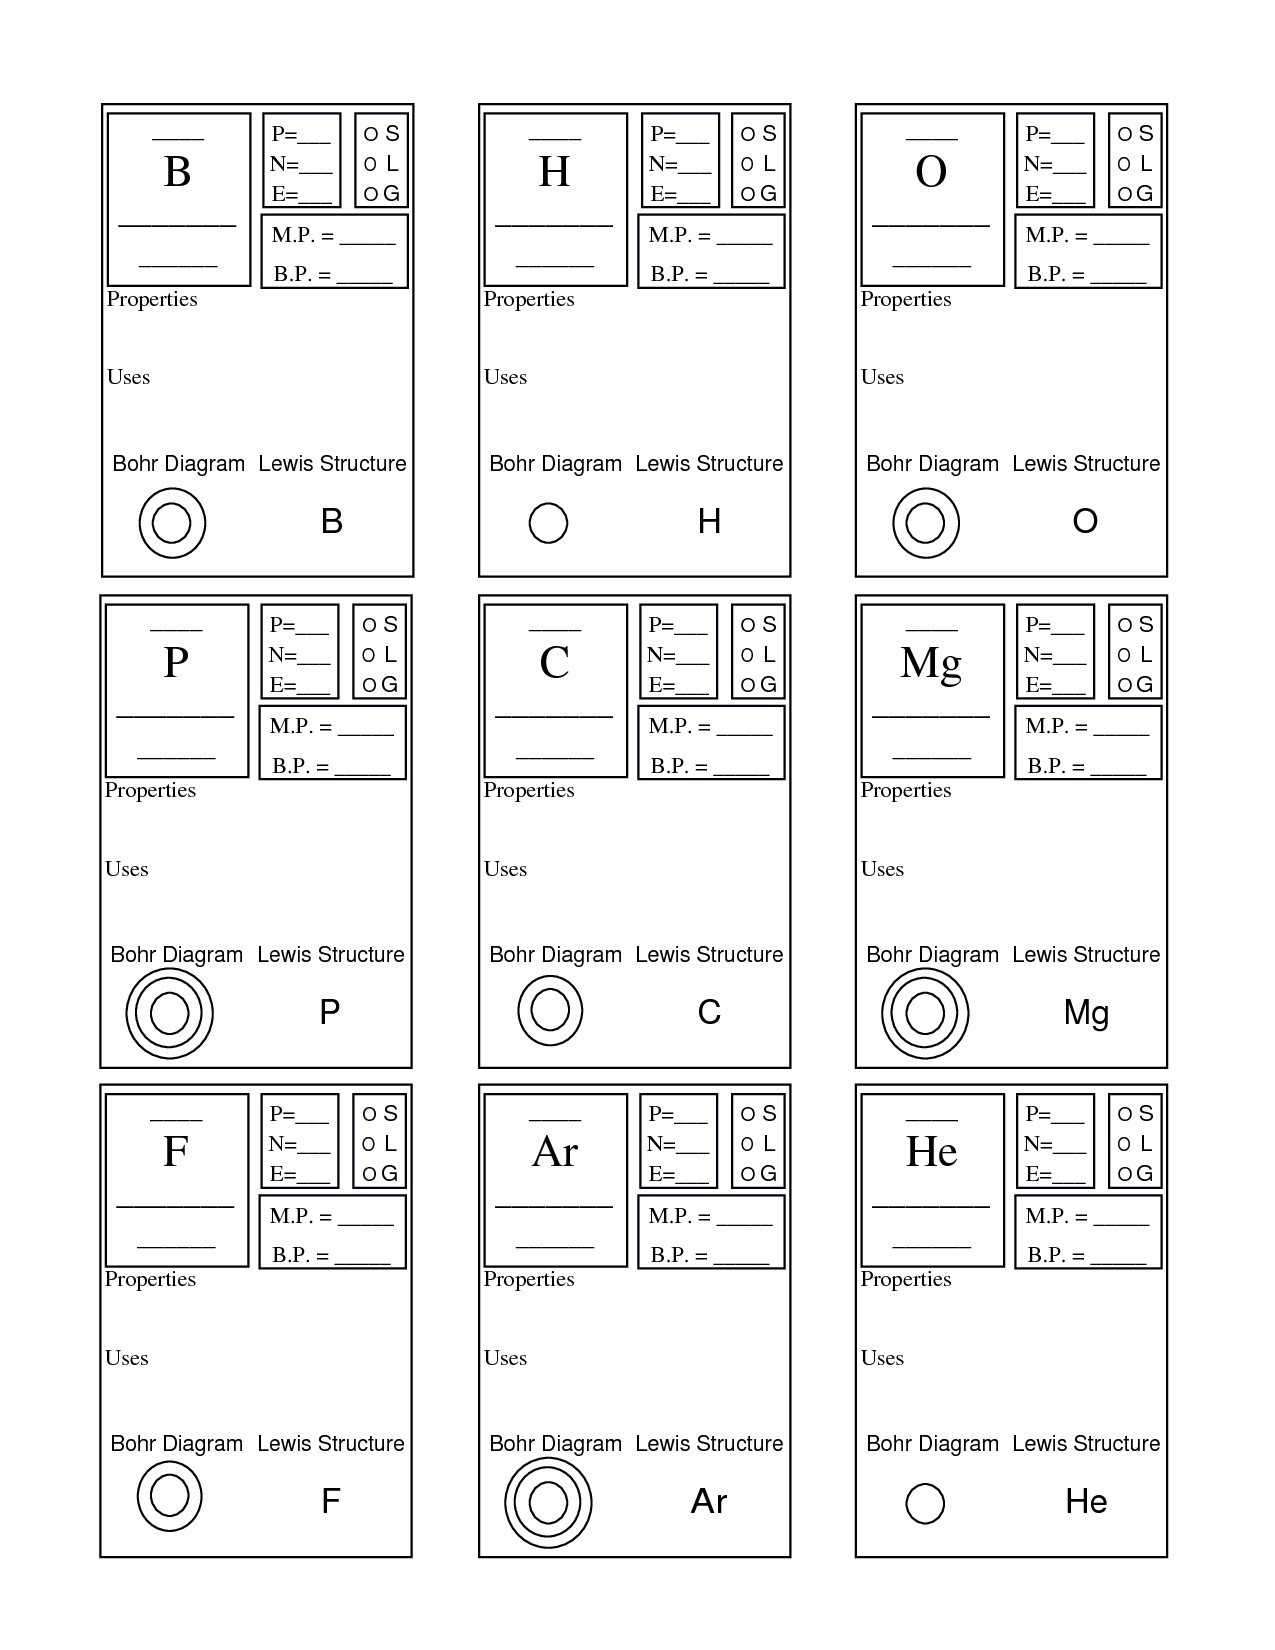 Scavenger Hunt Worksheet Also Periodic Table Worksheets High School Fresh Answer Key to the